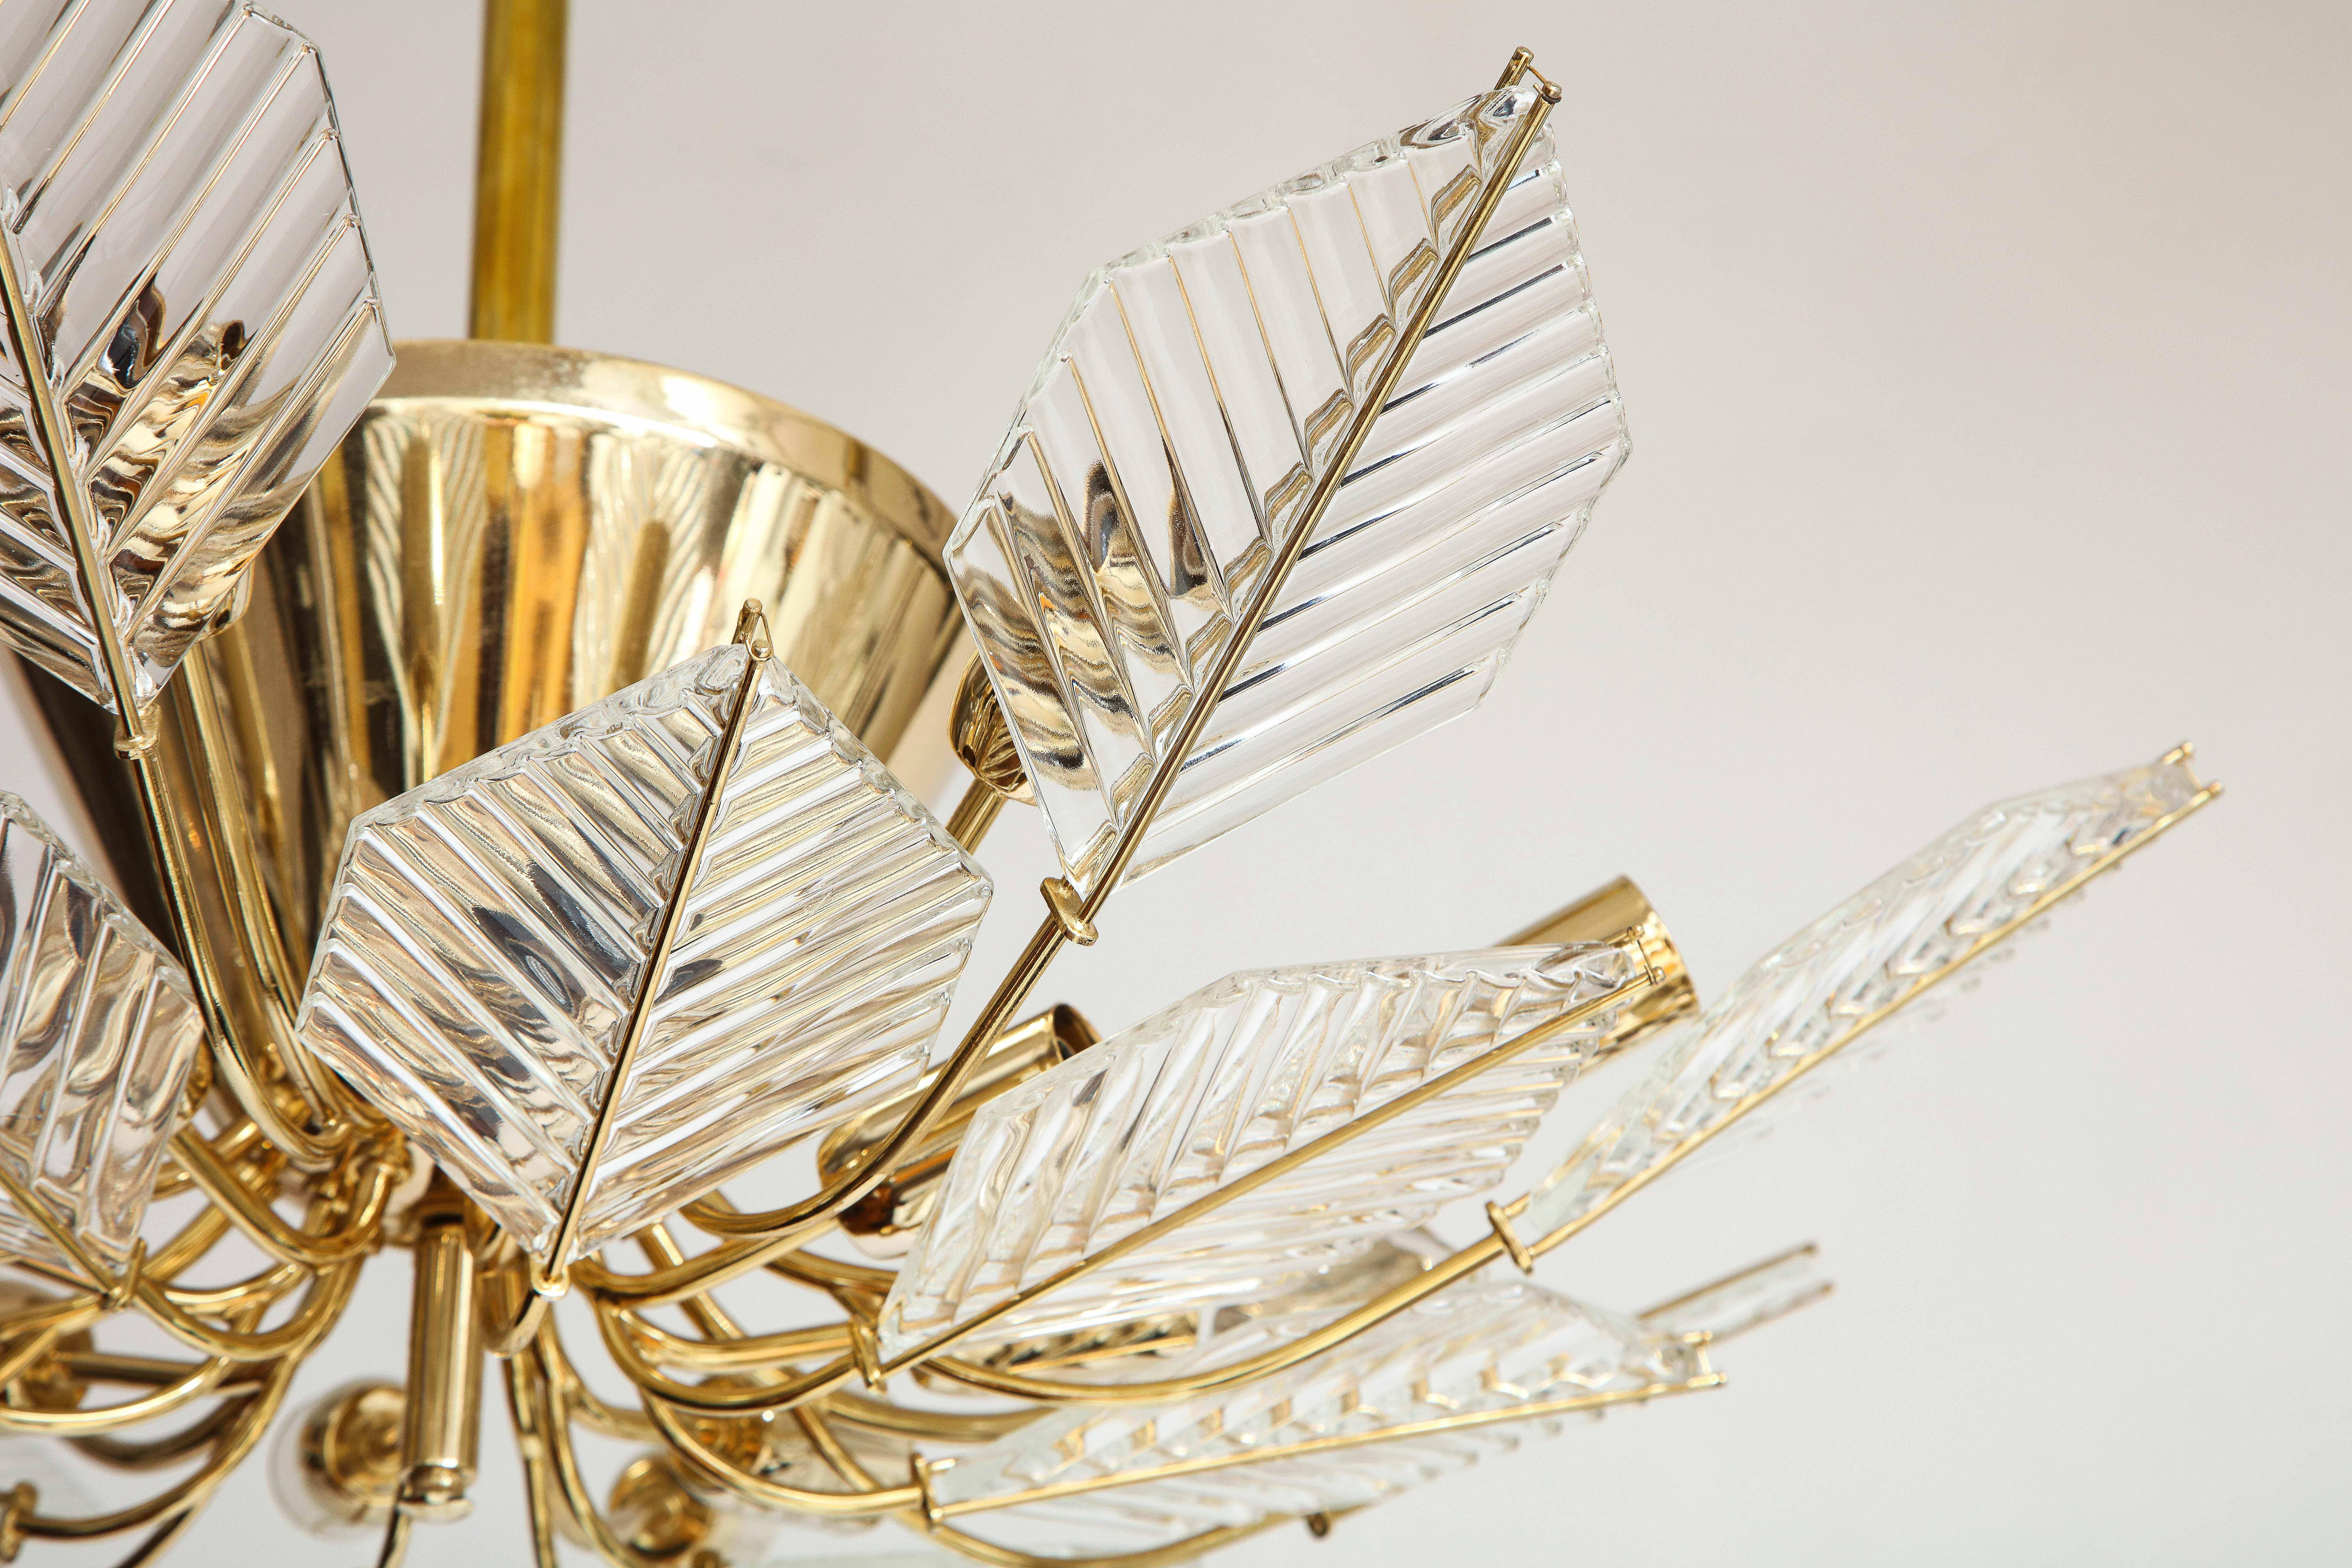 Gold Plate Italian 15 Light Glass Chandelier Decorated with Leaf Motif, La Murrina, 1970's For Sale